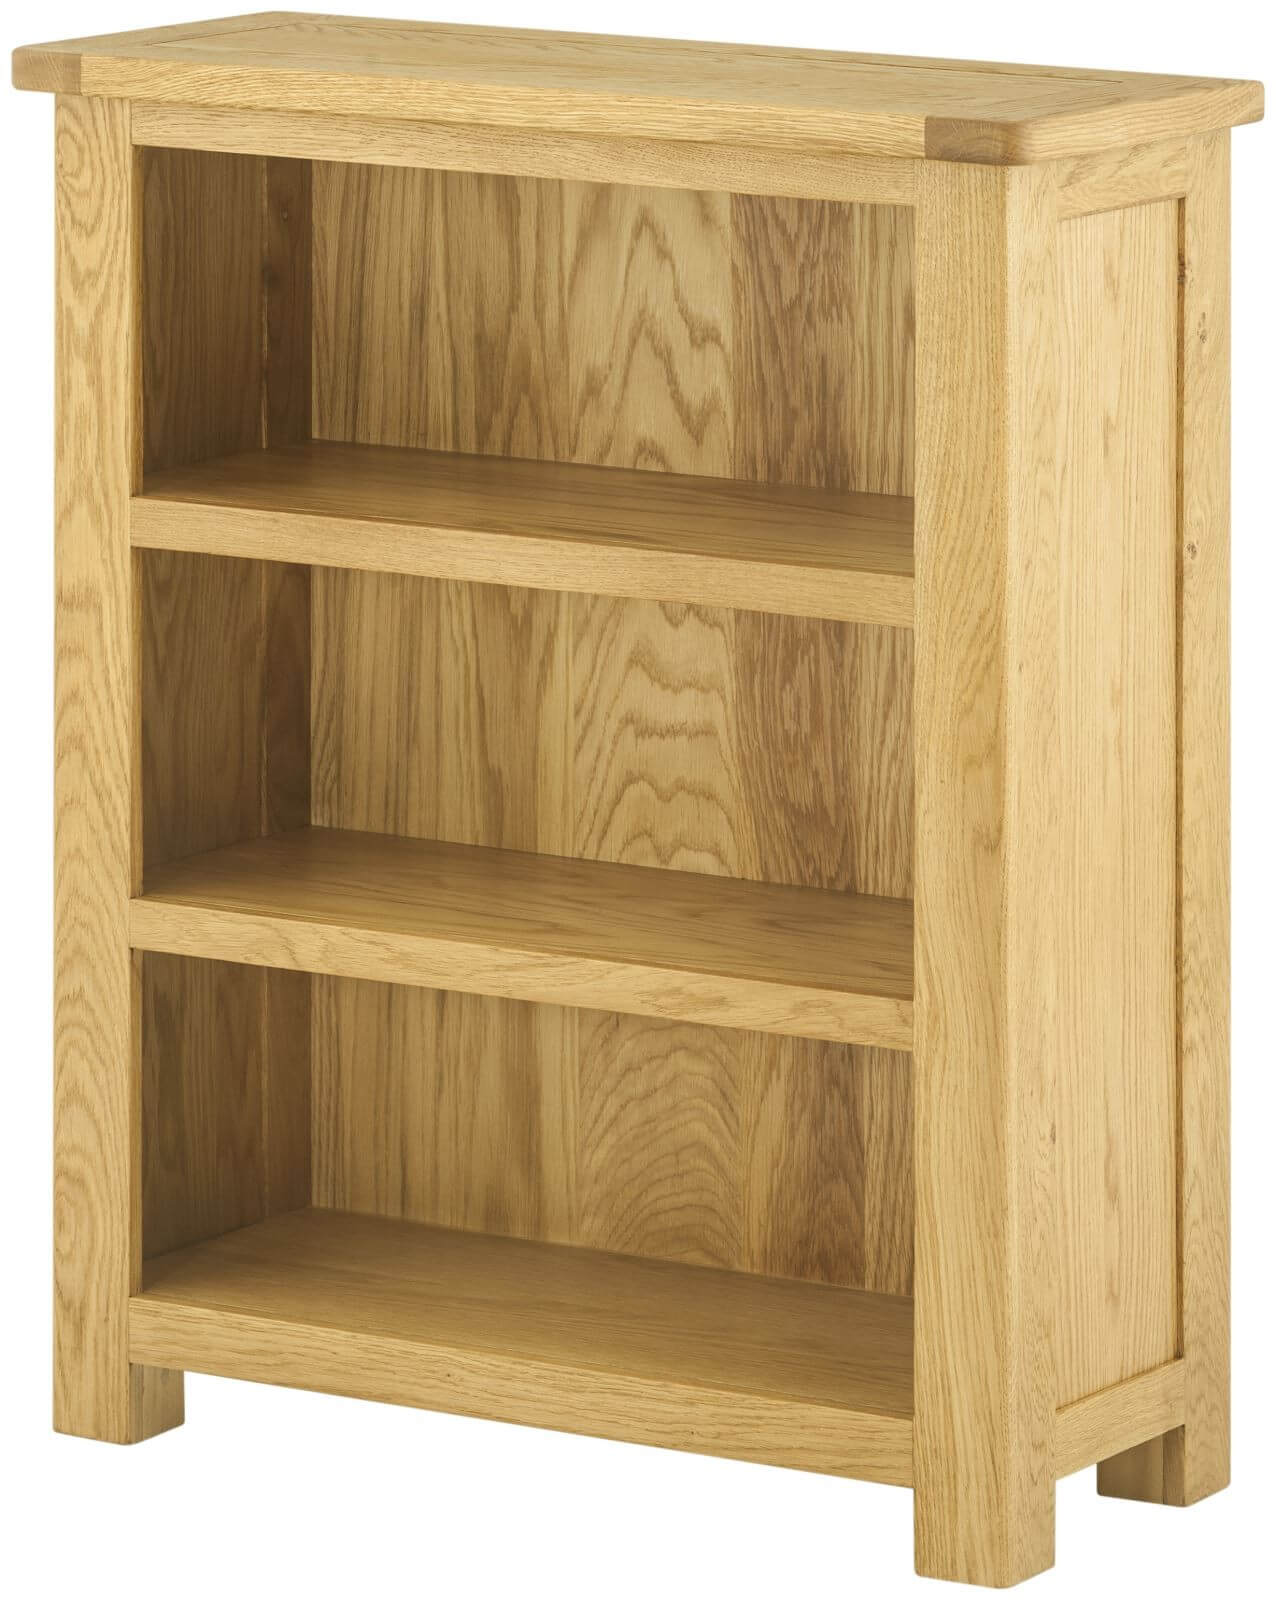 Showing image for Small seattle bookcase - oak